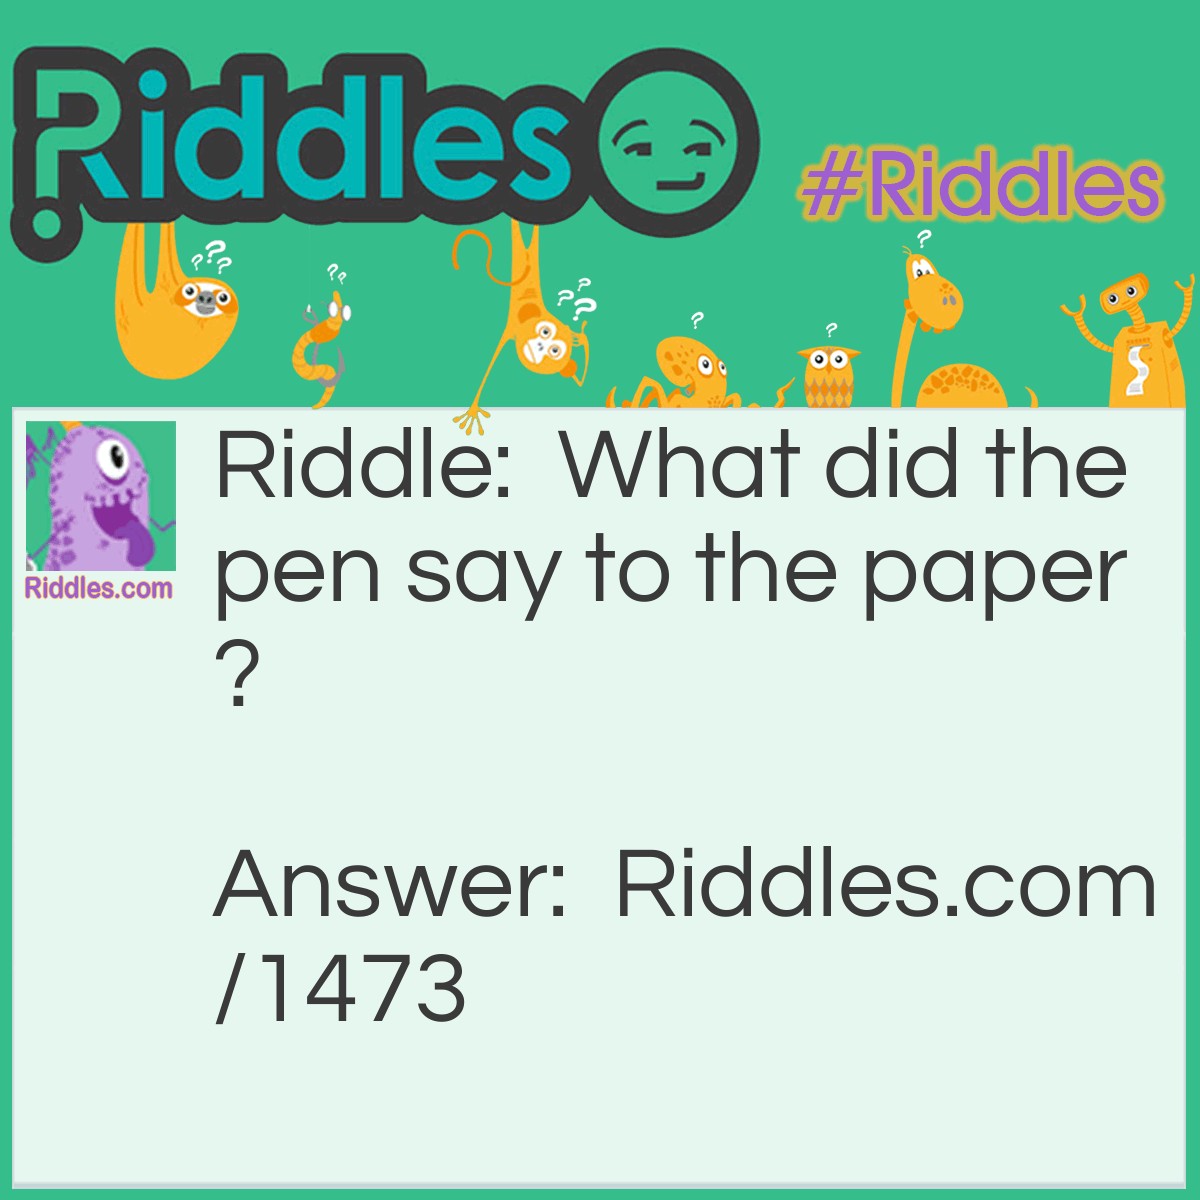 Riddle: What did the pen say to the paper? Answer: Lets run away and WRITE